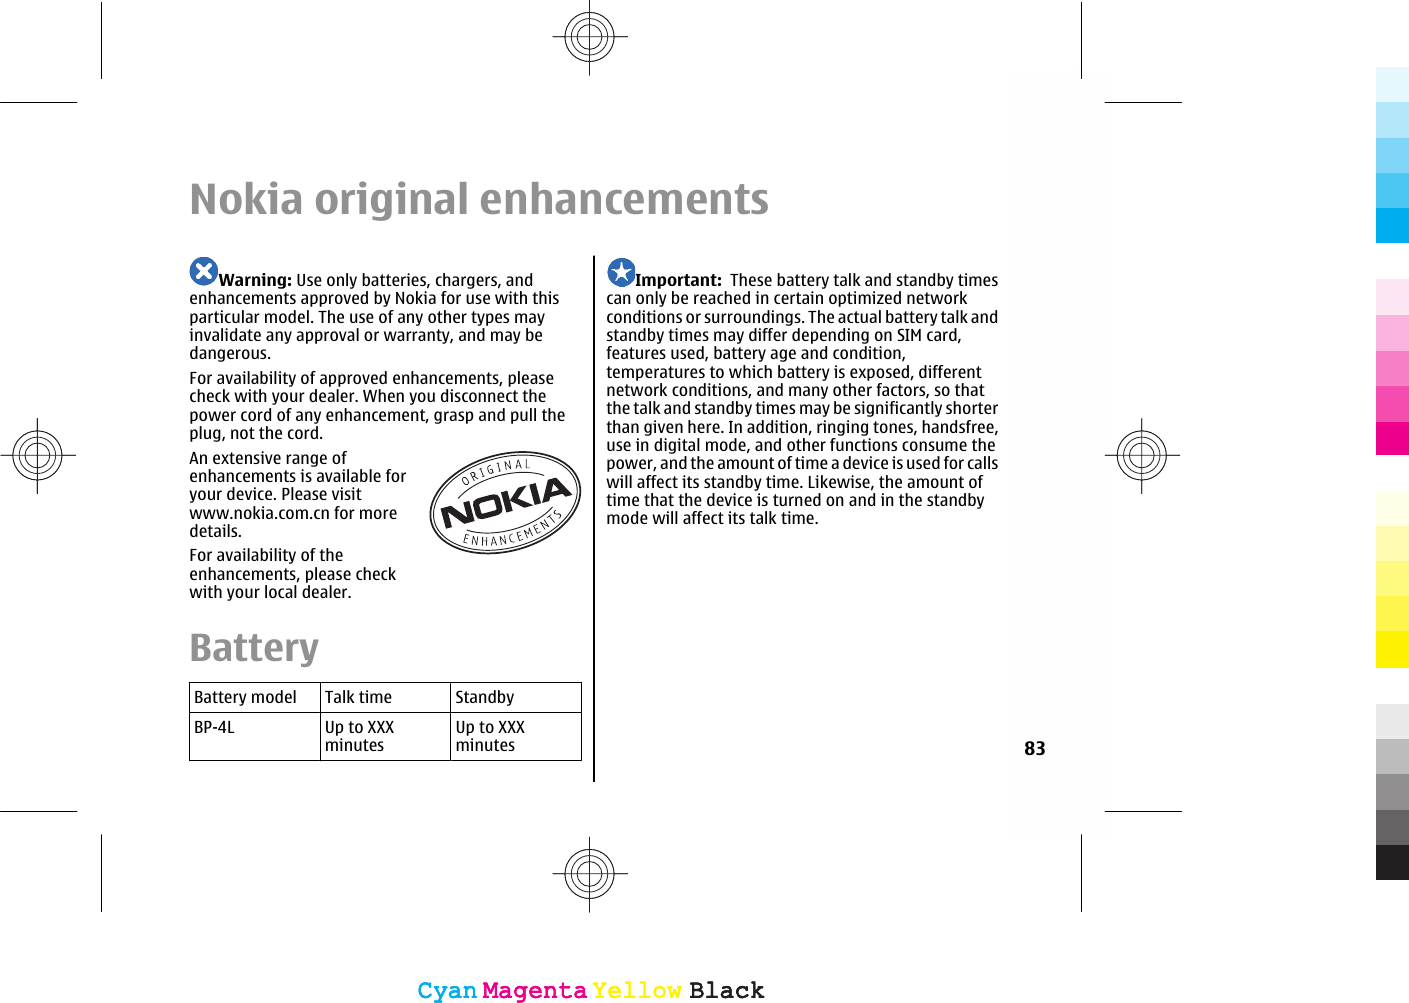 Nokia original enhancementsWarning: Use only batteries, chargers, andenhancements approved by Nokia for use with thisparticular model. The use of any other types mayinvalidate any approval or warranty, and may bedangerous.For availability of approved enhancements, pleasecheck with your dealer. When you disconnect thepower cord of any enhancement, grasp and pull theplug, not the cord.An extensive range ofenhancements is available foryour device. Please visitwww.nokia.com.cn for moredetails.For availability of theenhancements, please checkwith your local dealer.BatteryBattery model Talk time StandbyBP-4L Up to XXXminutesUp to XXXminutesImportant:  These battery talk and standby timescan only be reached in certain optimized networkconditions or surroundings. The actual battery talk andstandby times may differ depending on SIM card,features used, battery age and condition,temperatures to which battery is exposed, differentnetwork conditions, and many other factors, so thatthe talk and standby times may be significantly shorterthan given here. In addition, ringing tones, handsfree,use in digital mode, and other functions consume thepower, and the amount of time a device is used for callswill affect its standby time. Likewise, the amount oftime that the device is turned on and in the standbymode will affect its talk time.83CyanCyanMagentaMagentaYellowYellowBlackBlackCyanCyanMagentaMagentaYellowYellowBlackBlack